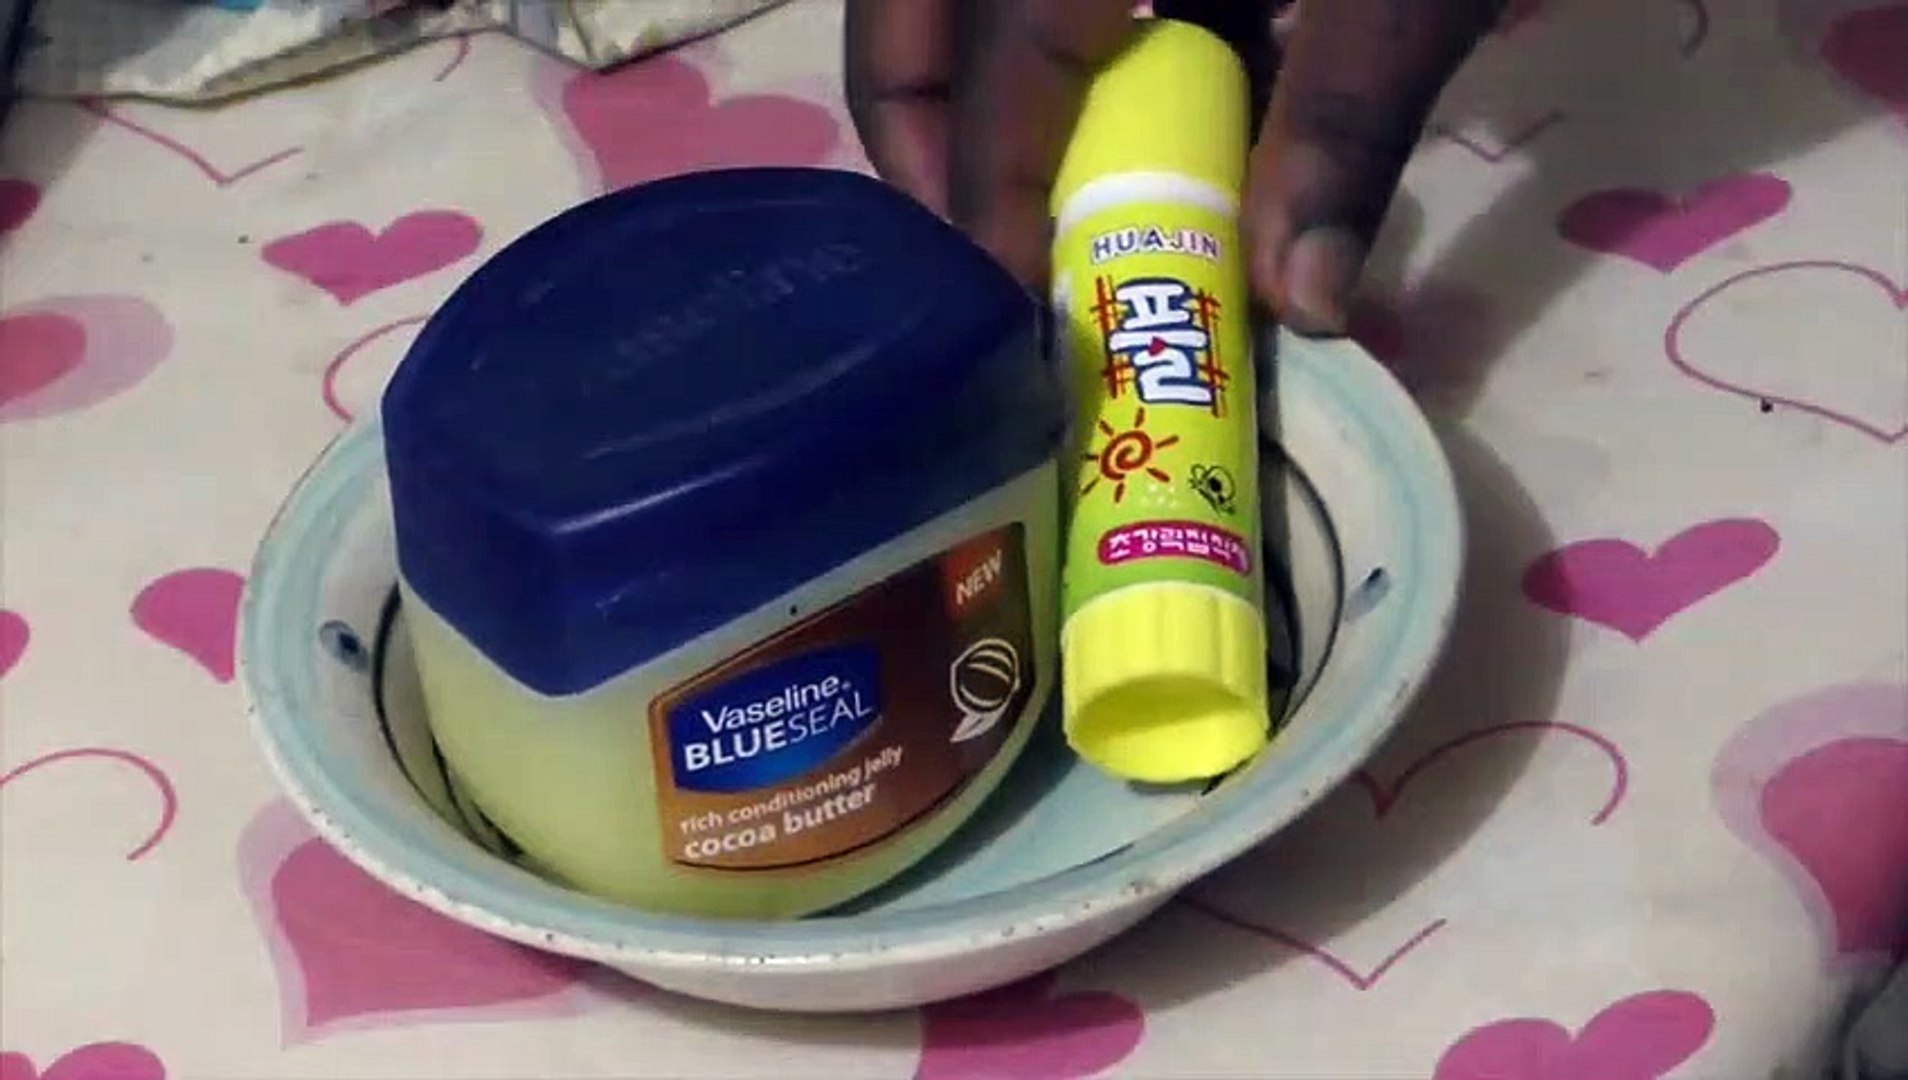 .How to make slime with vaseline and glue stick !! slime with vaseline and  glue Stick only